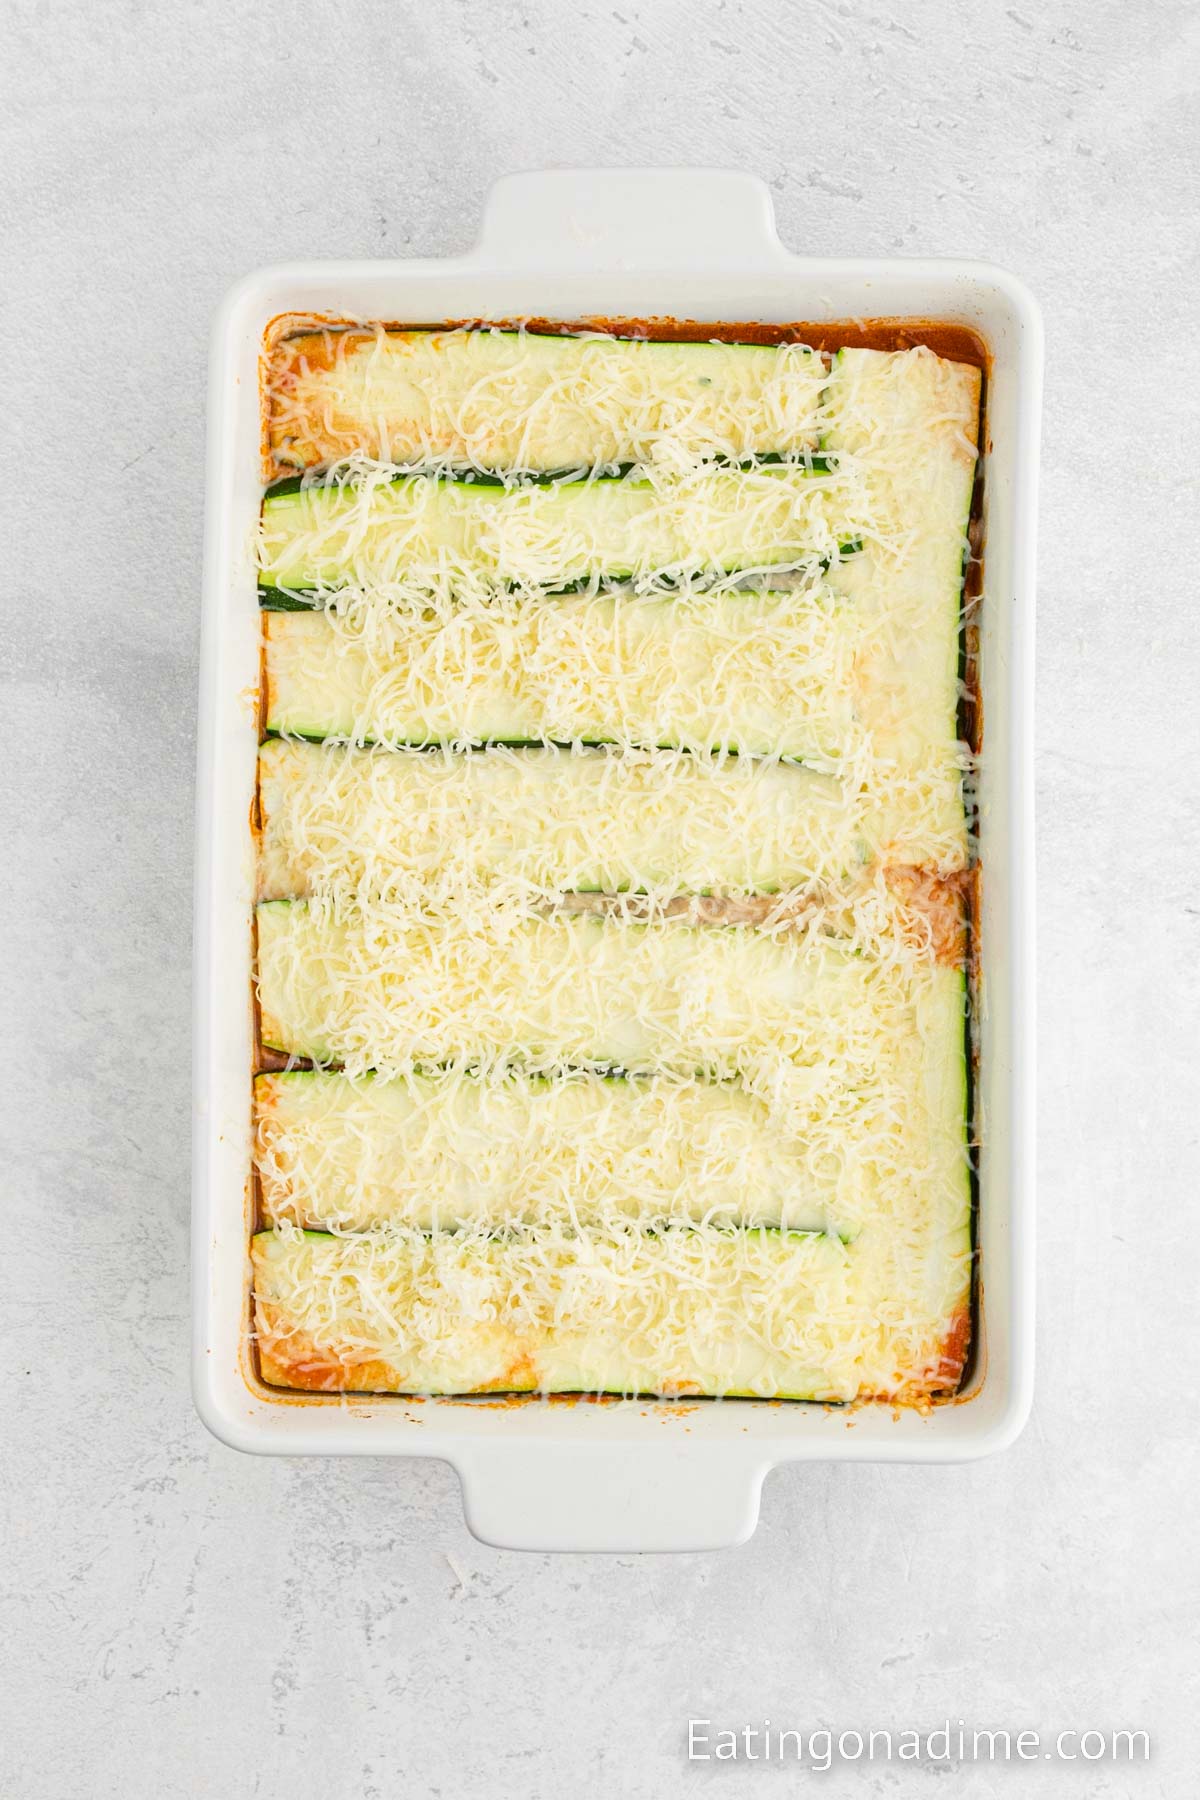 Topping the zucchini lasagna with shredded cheese